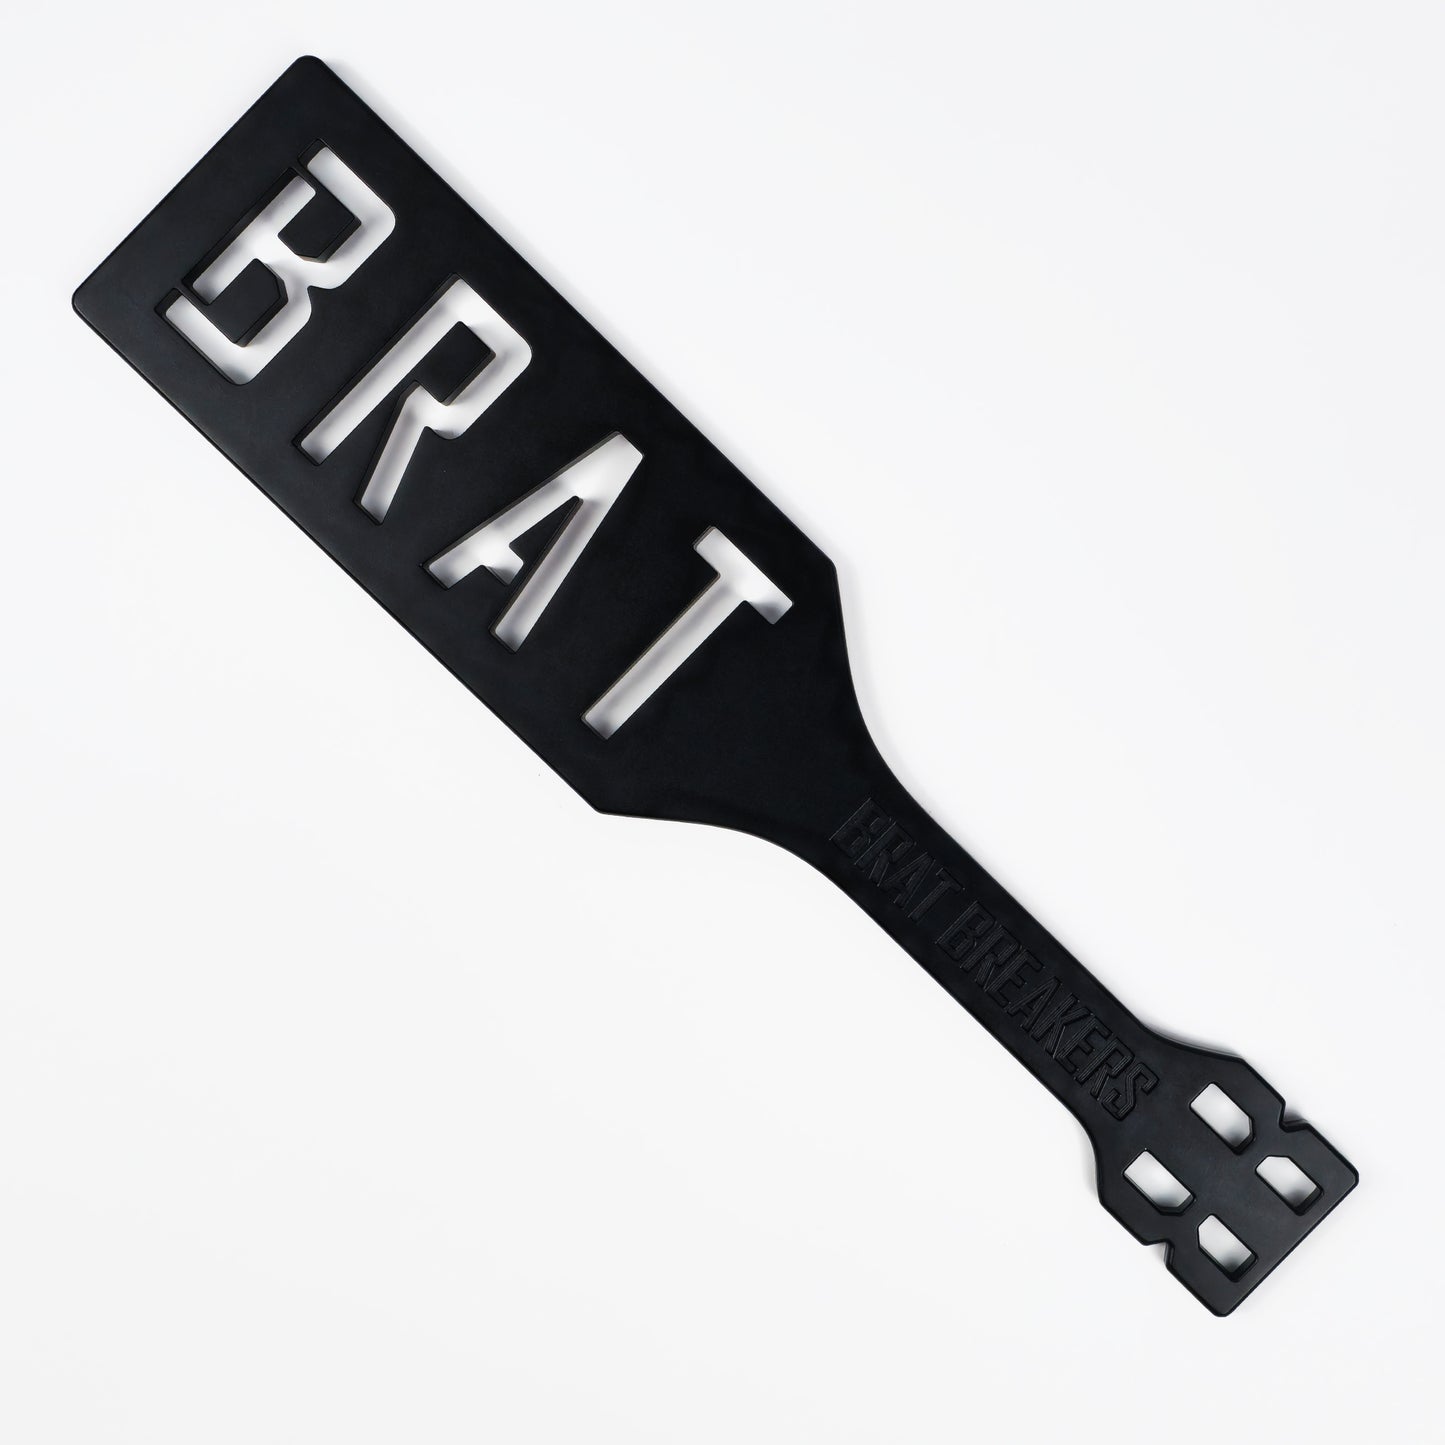 Black Steel Spanking Paddle with BRAT cut out made by Brat Breakers